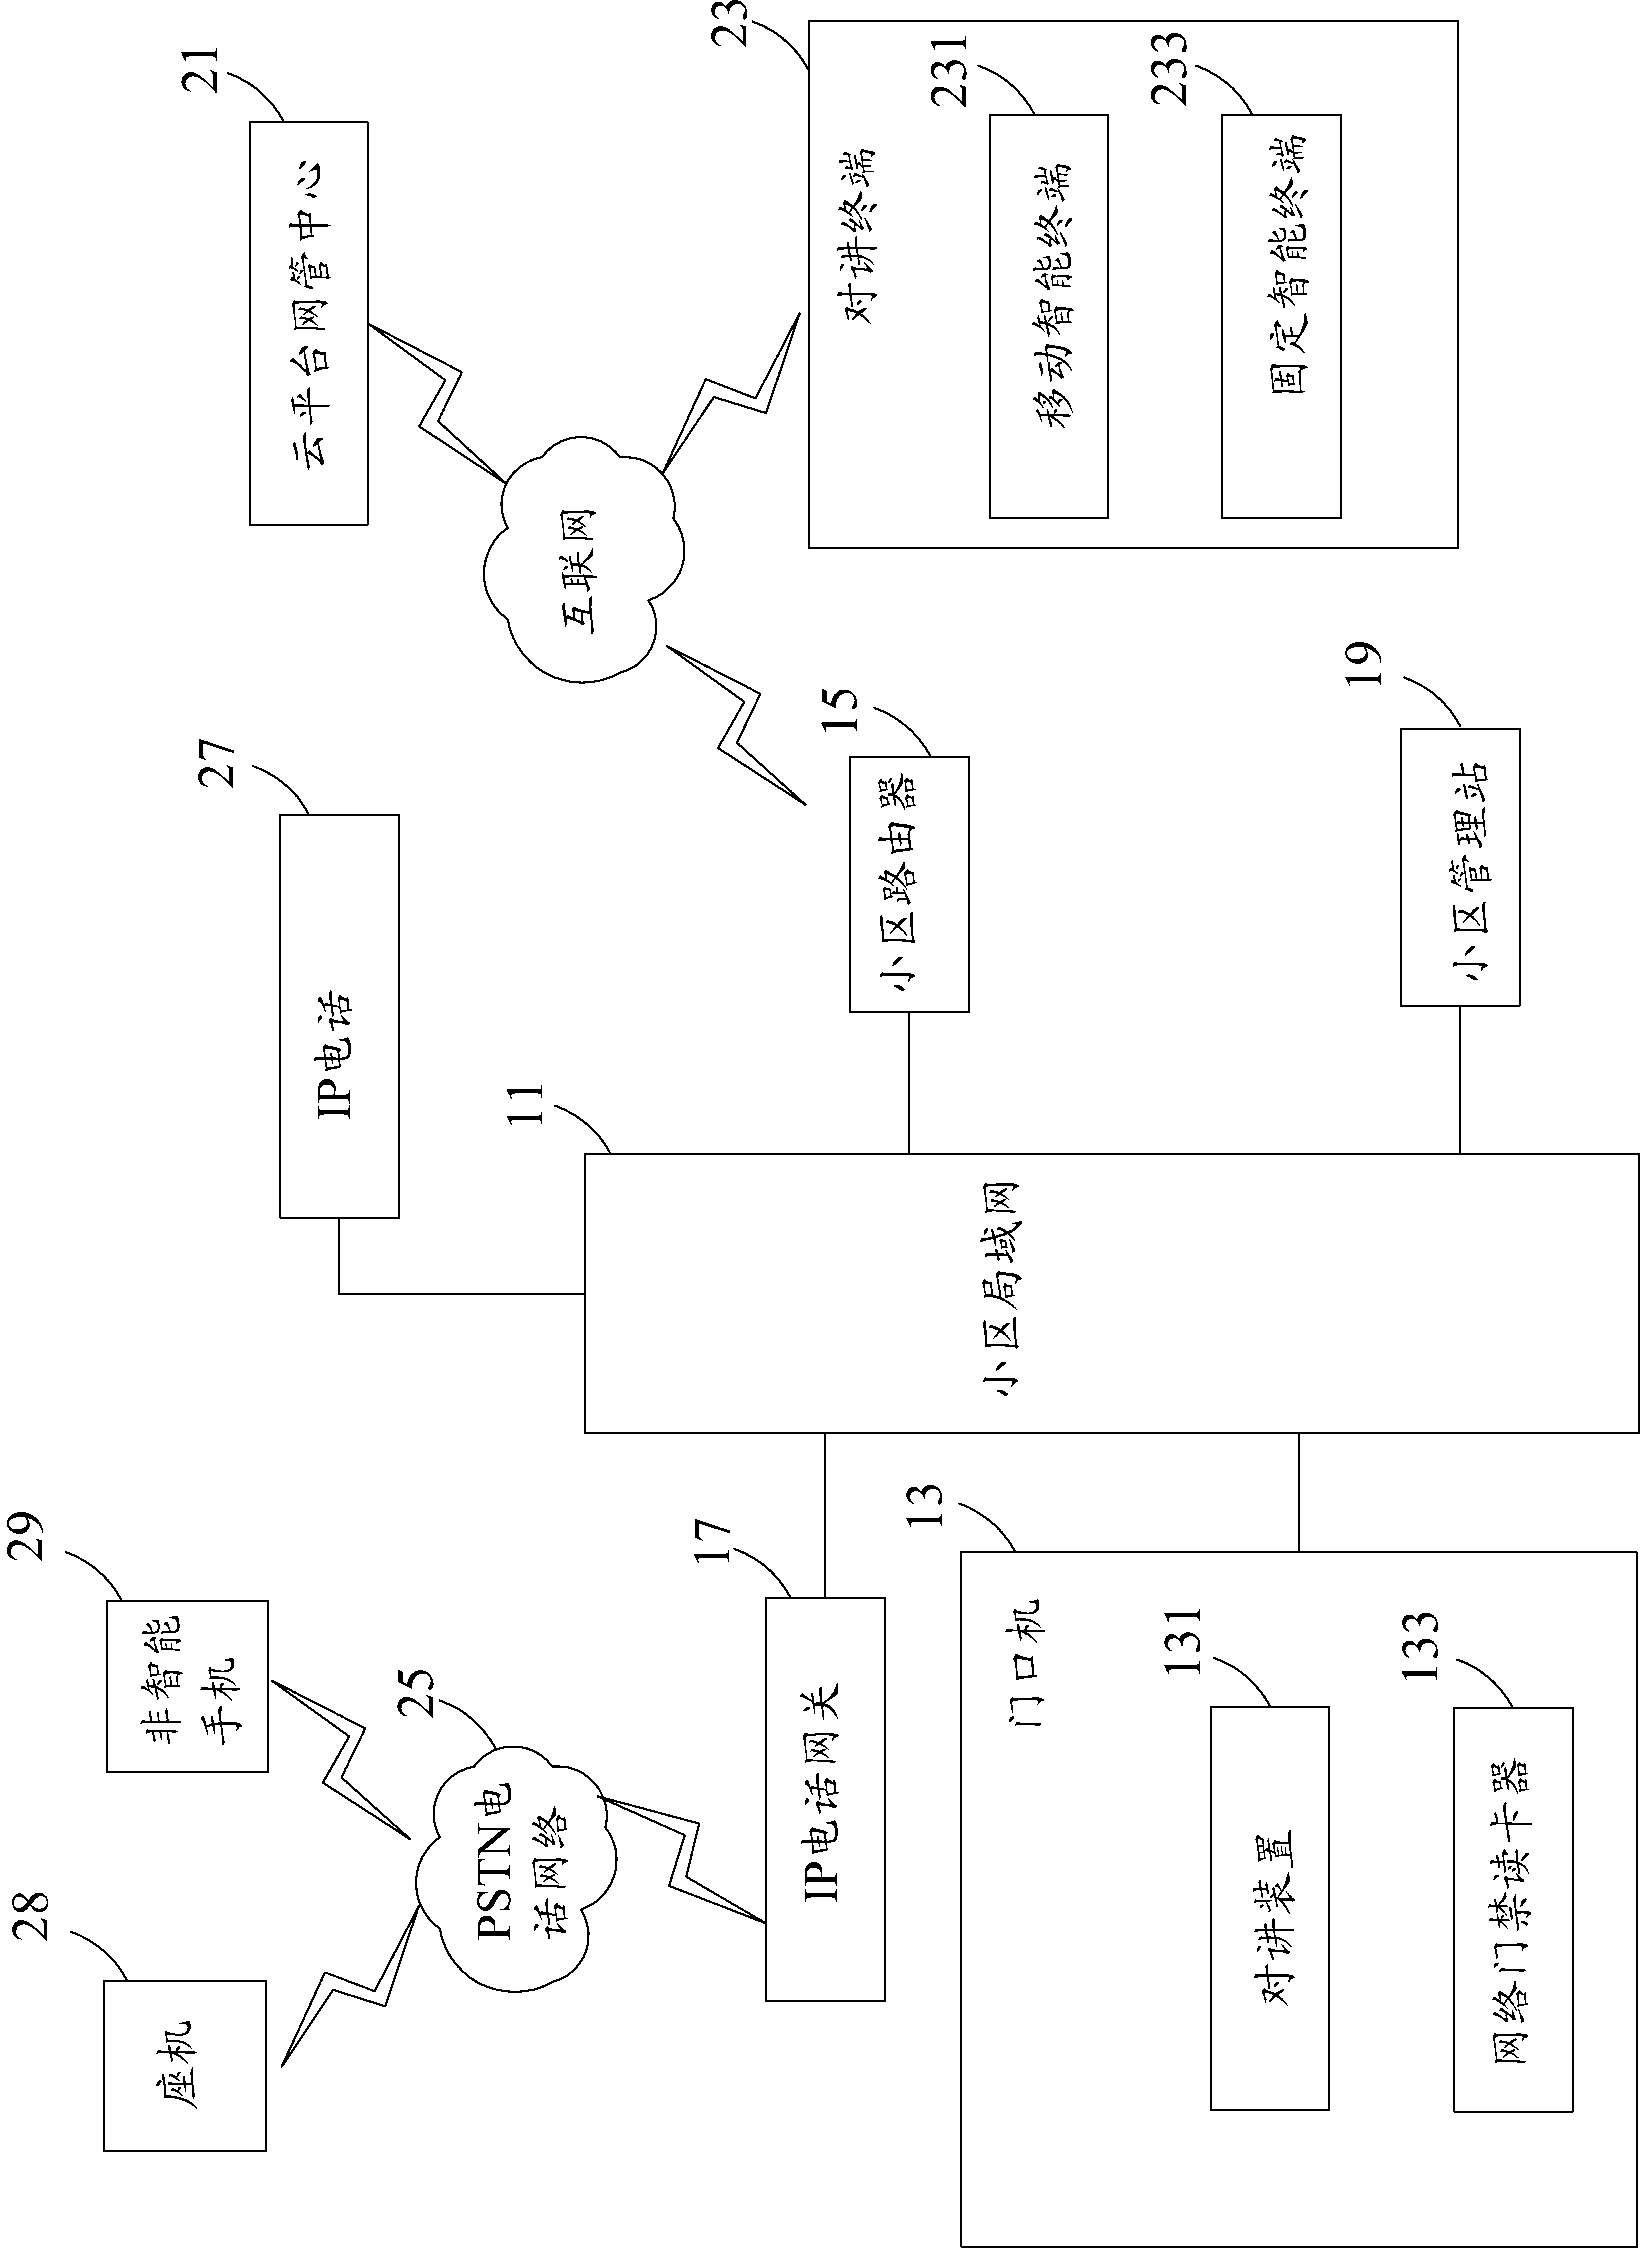 Visible intercom system and method for buildings